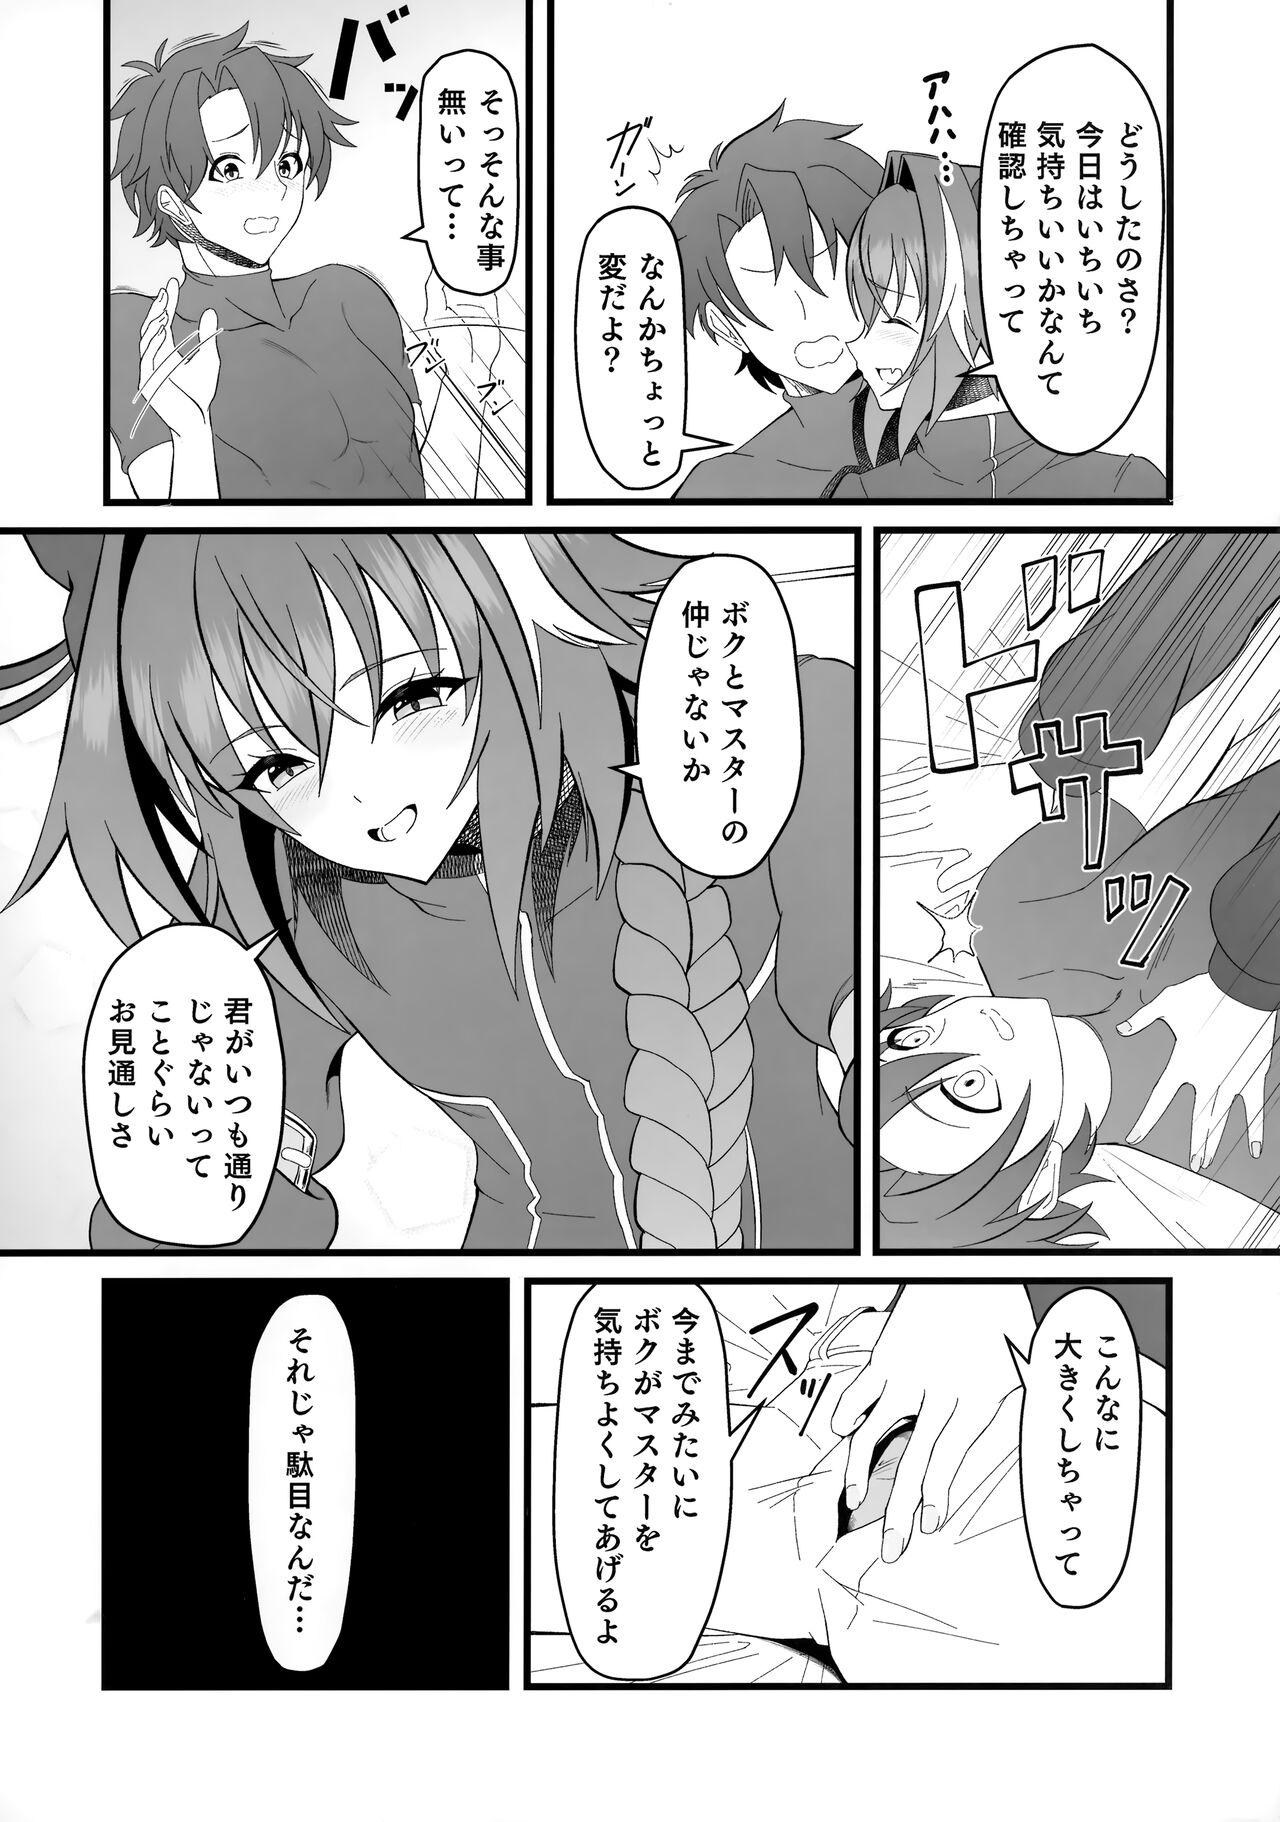 Cousin Kimi no Ichiban ni Naritakute - I wanted to be your number one. - Fate grand order Spank - Page 7